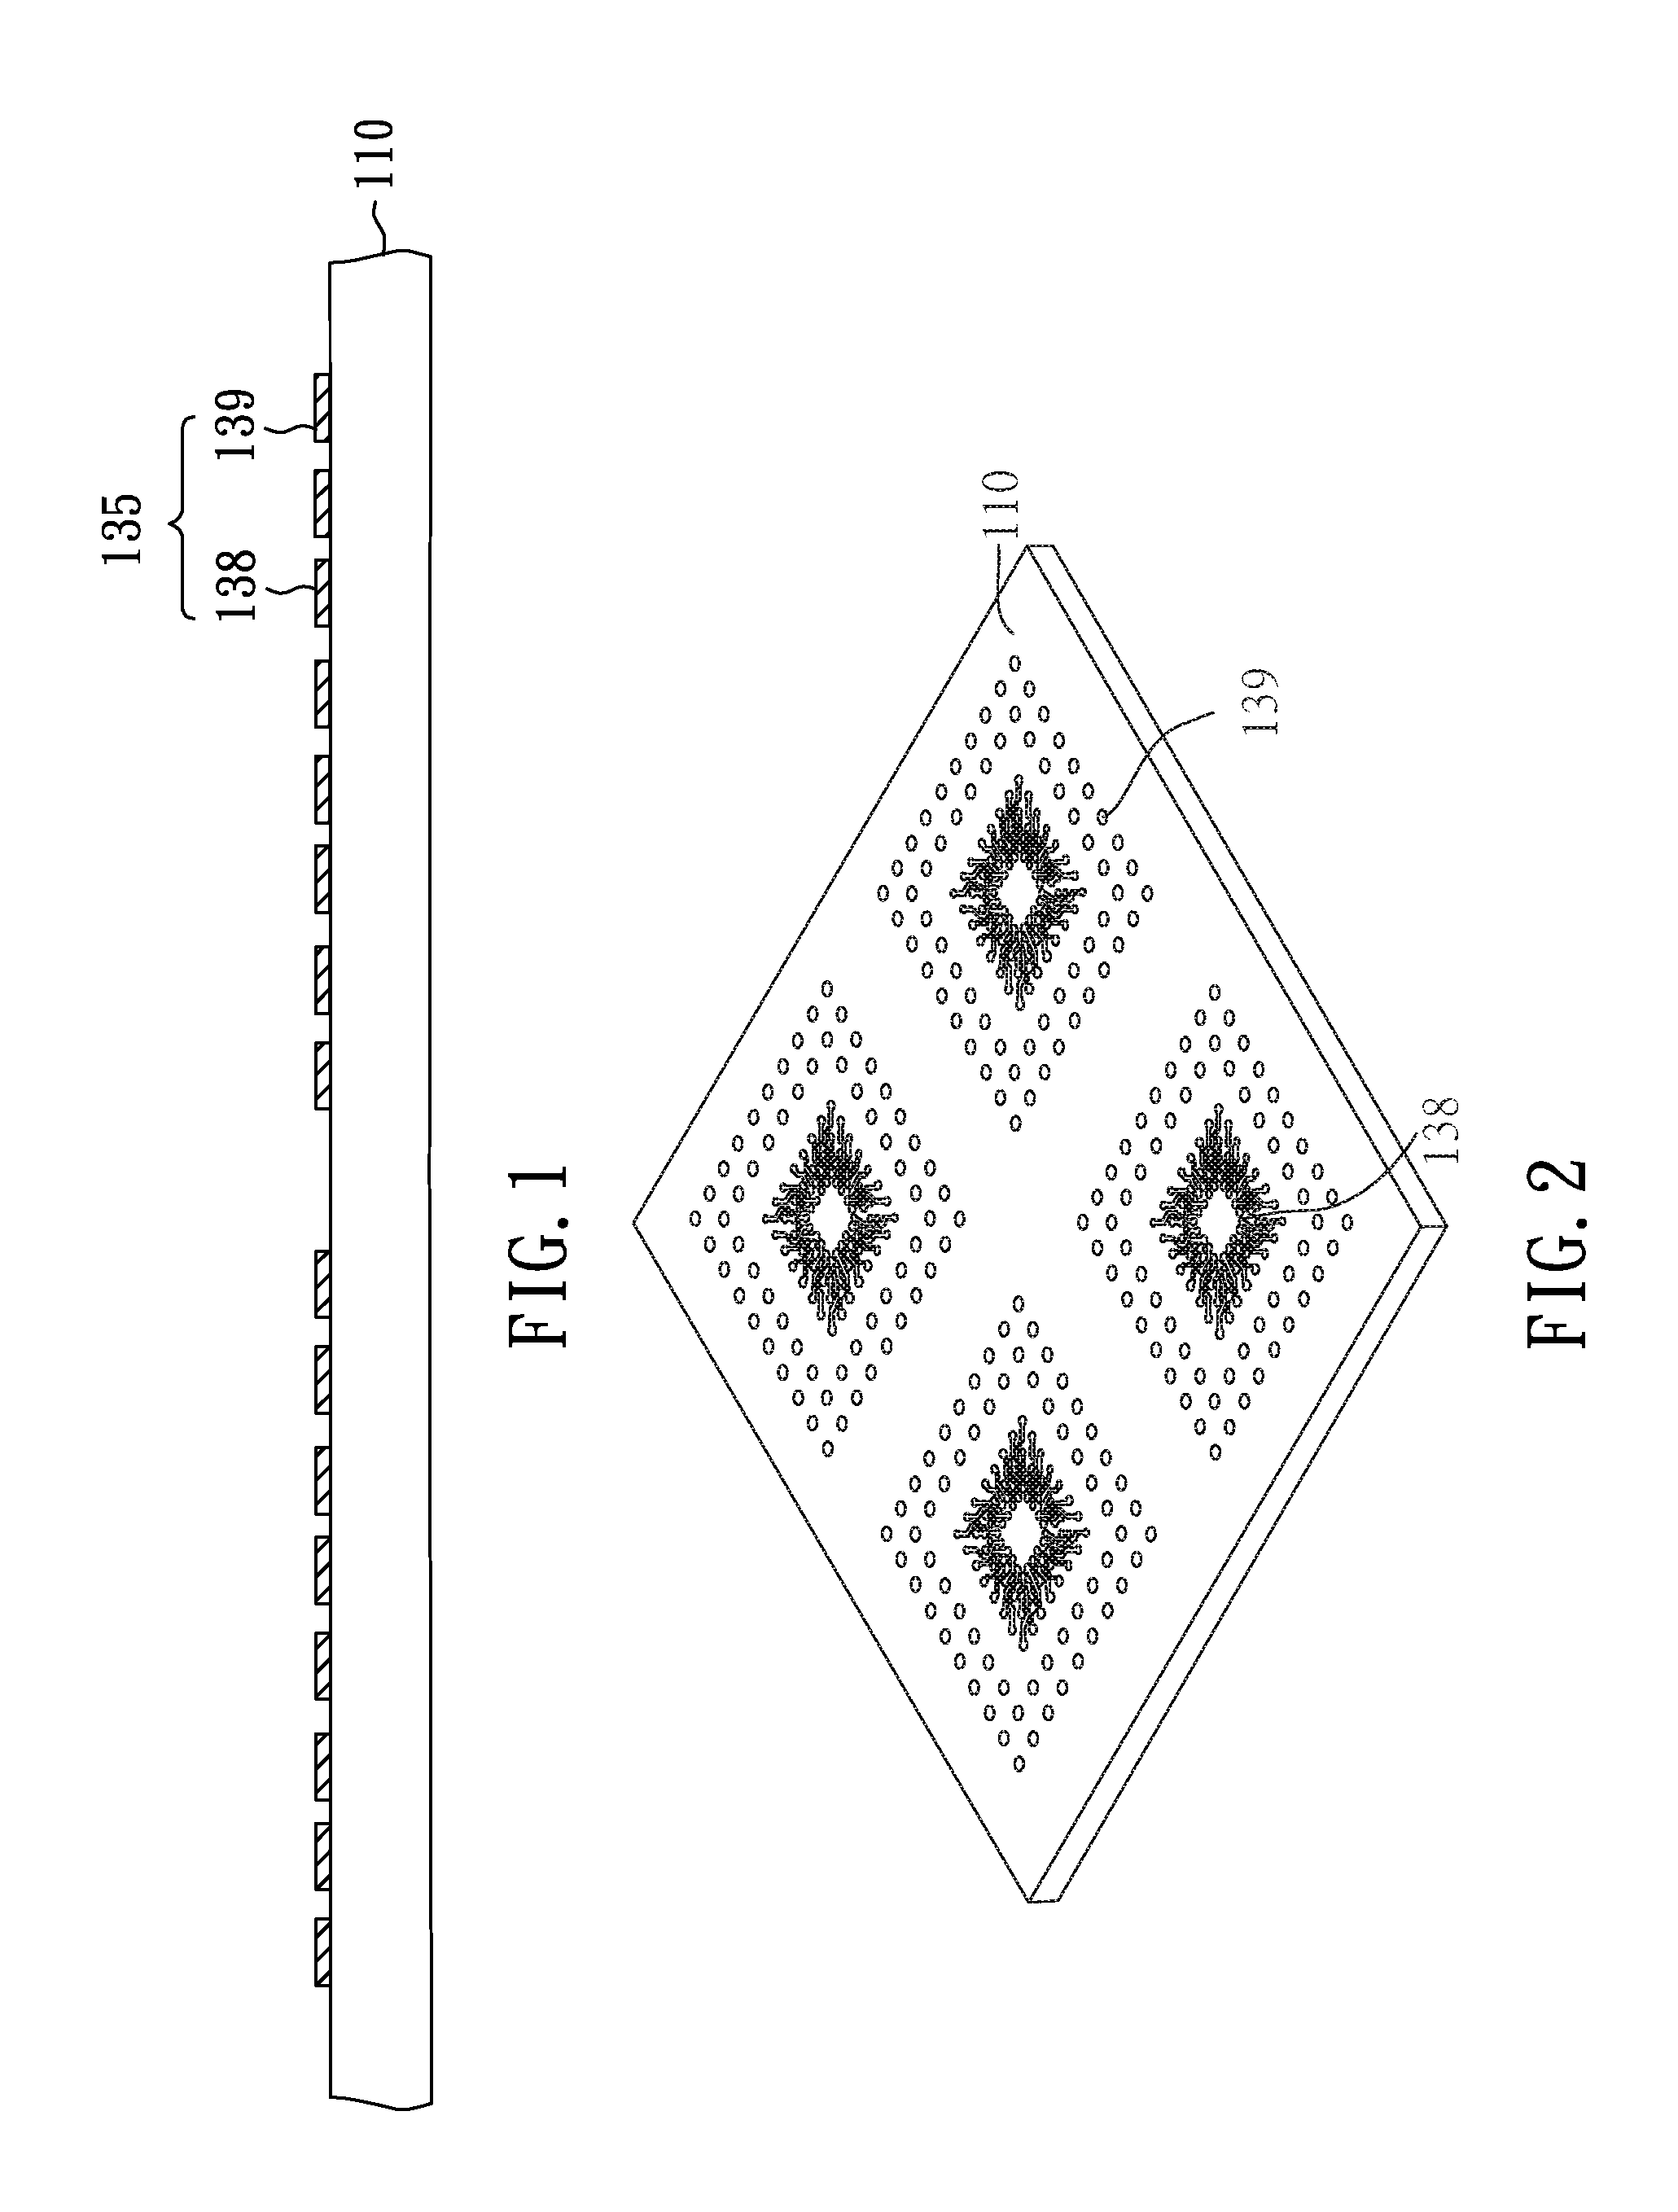 Wiring board with dual stiffeners and dual routing circuitries integrated together and method of making the same